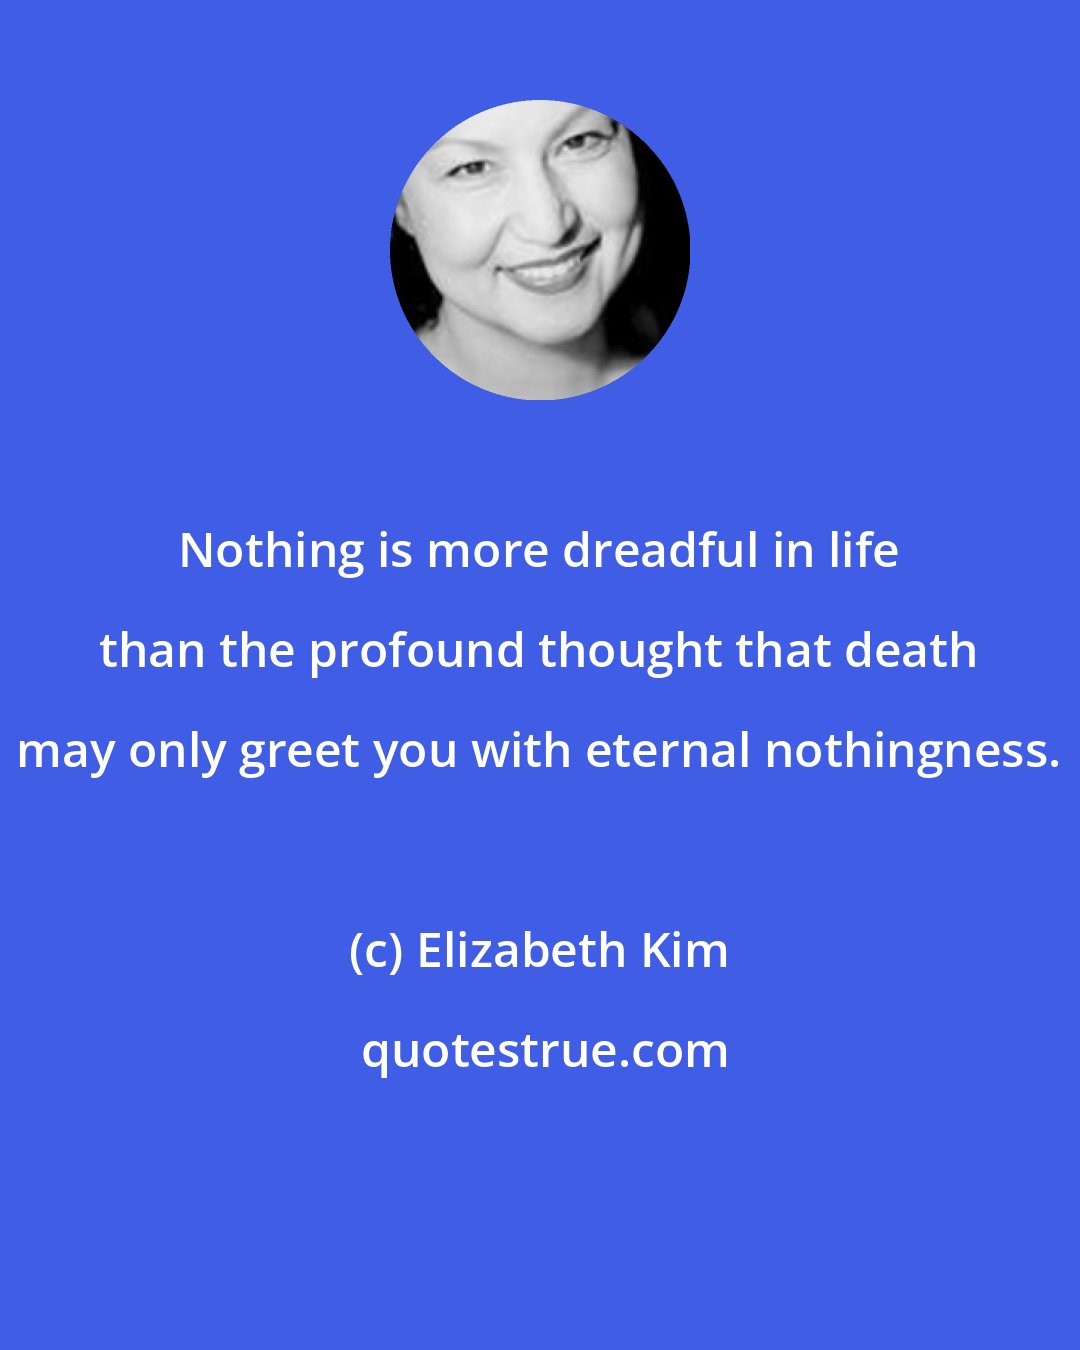 Elizabeth Kim: Nothing is more dreadful in life than the profound thought that death may only greet you with eternal nothingness.